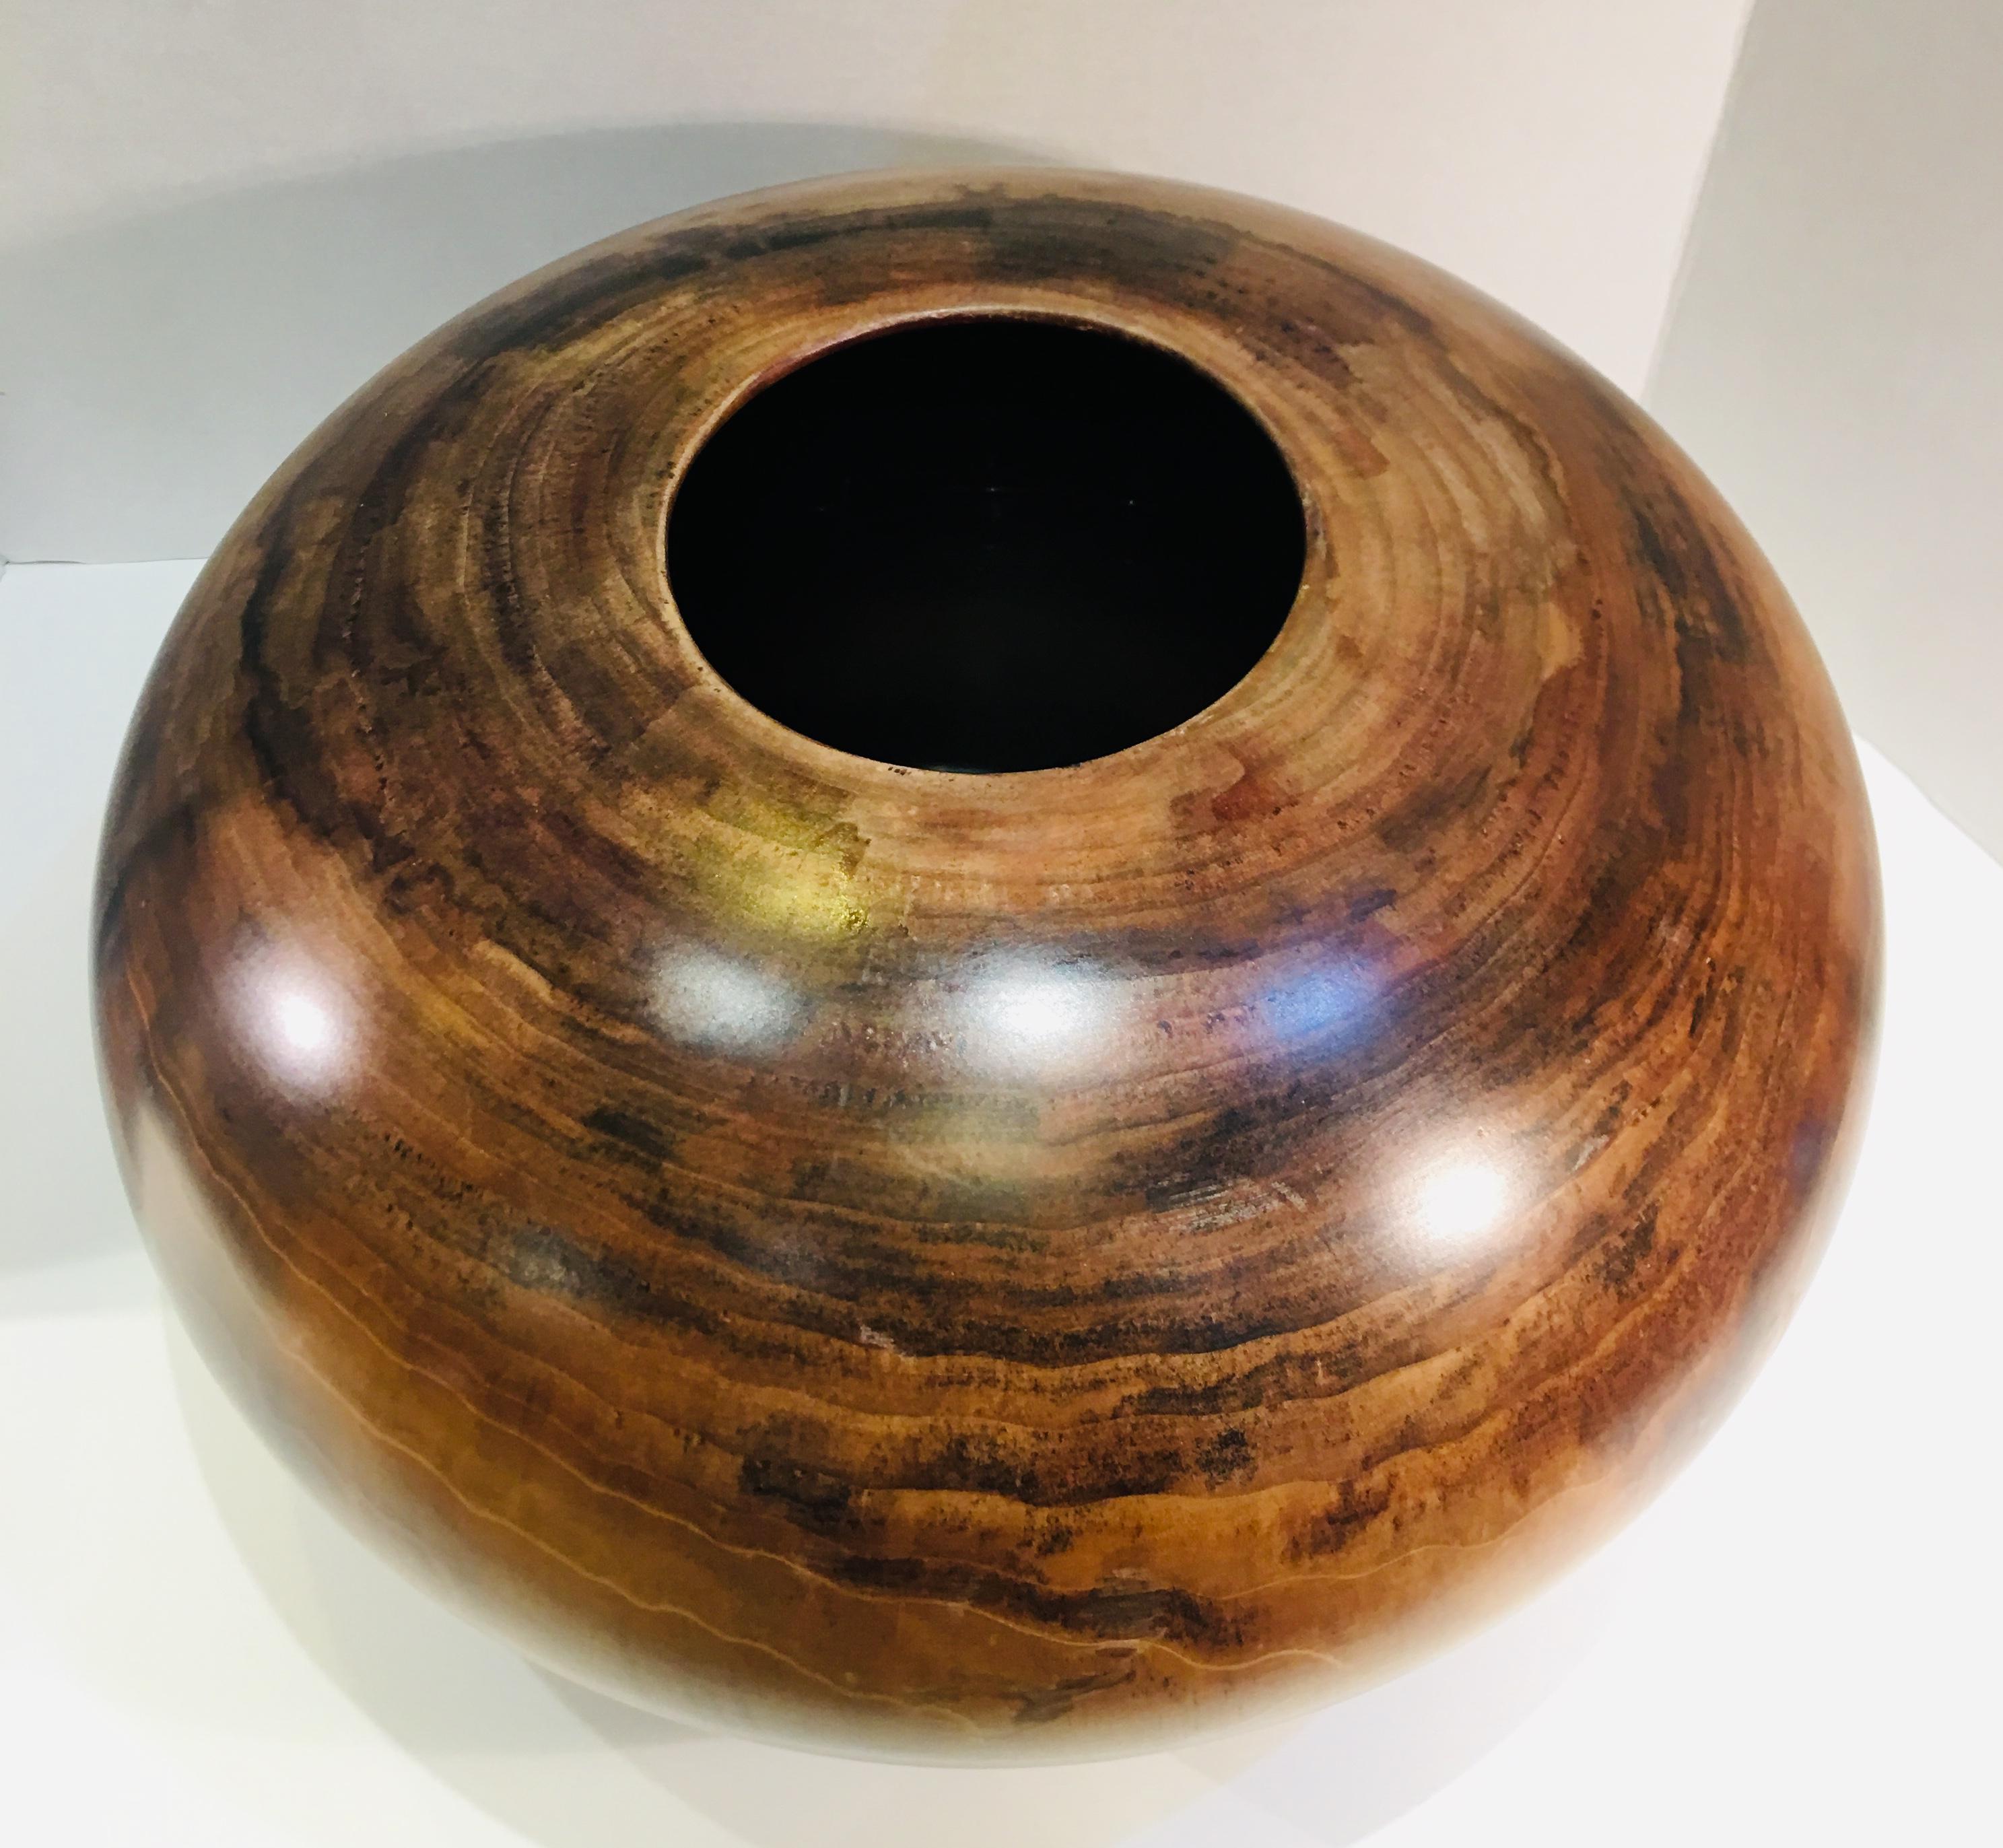 Handsome, handmade wooden bowl is a museum quality work of art that took many months to create. It is impressively large, measuring 9 inches high x 15 inches in diameter.

Signed, 